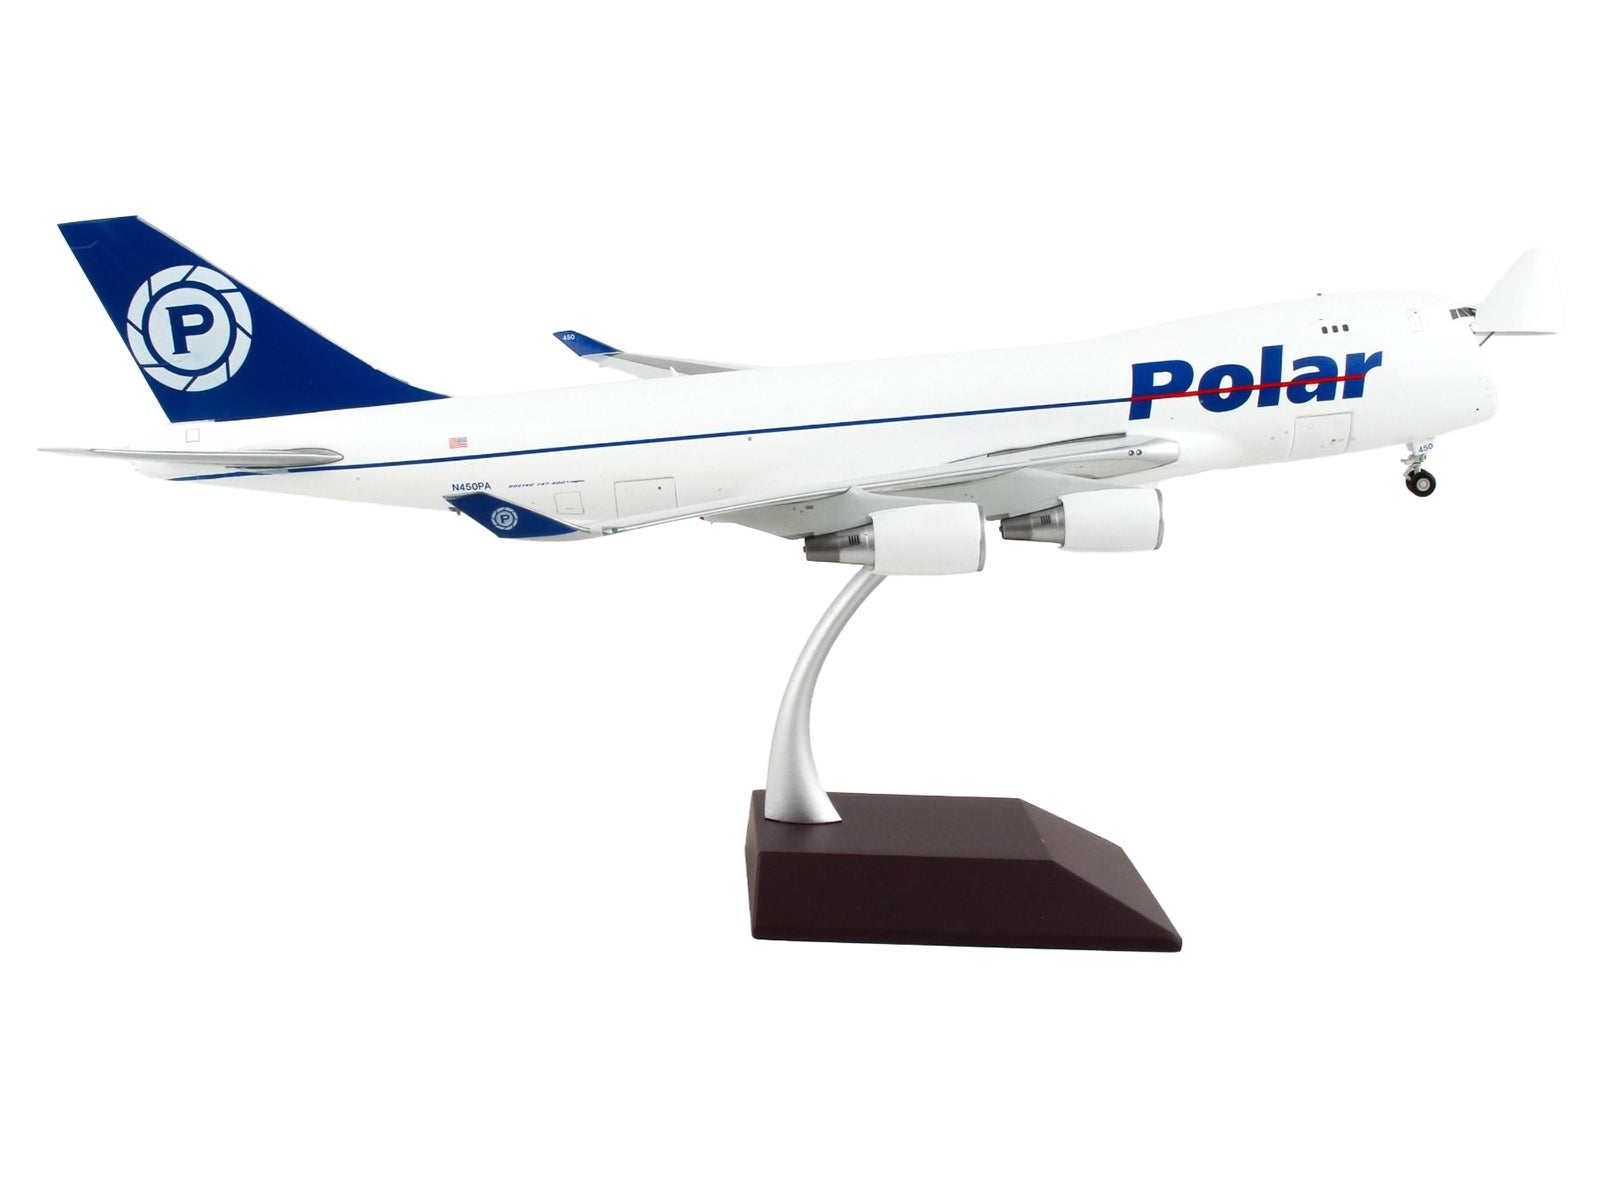 Boeing 747-400F Commercial Aircraft "Polar Air Cargo" White with Blue Tail